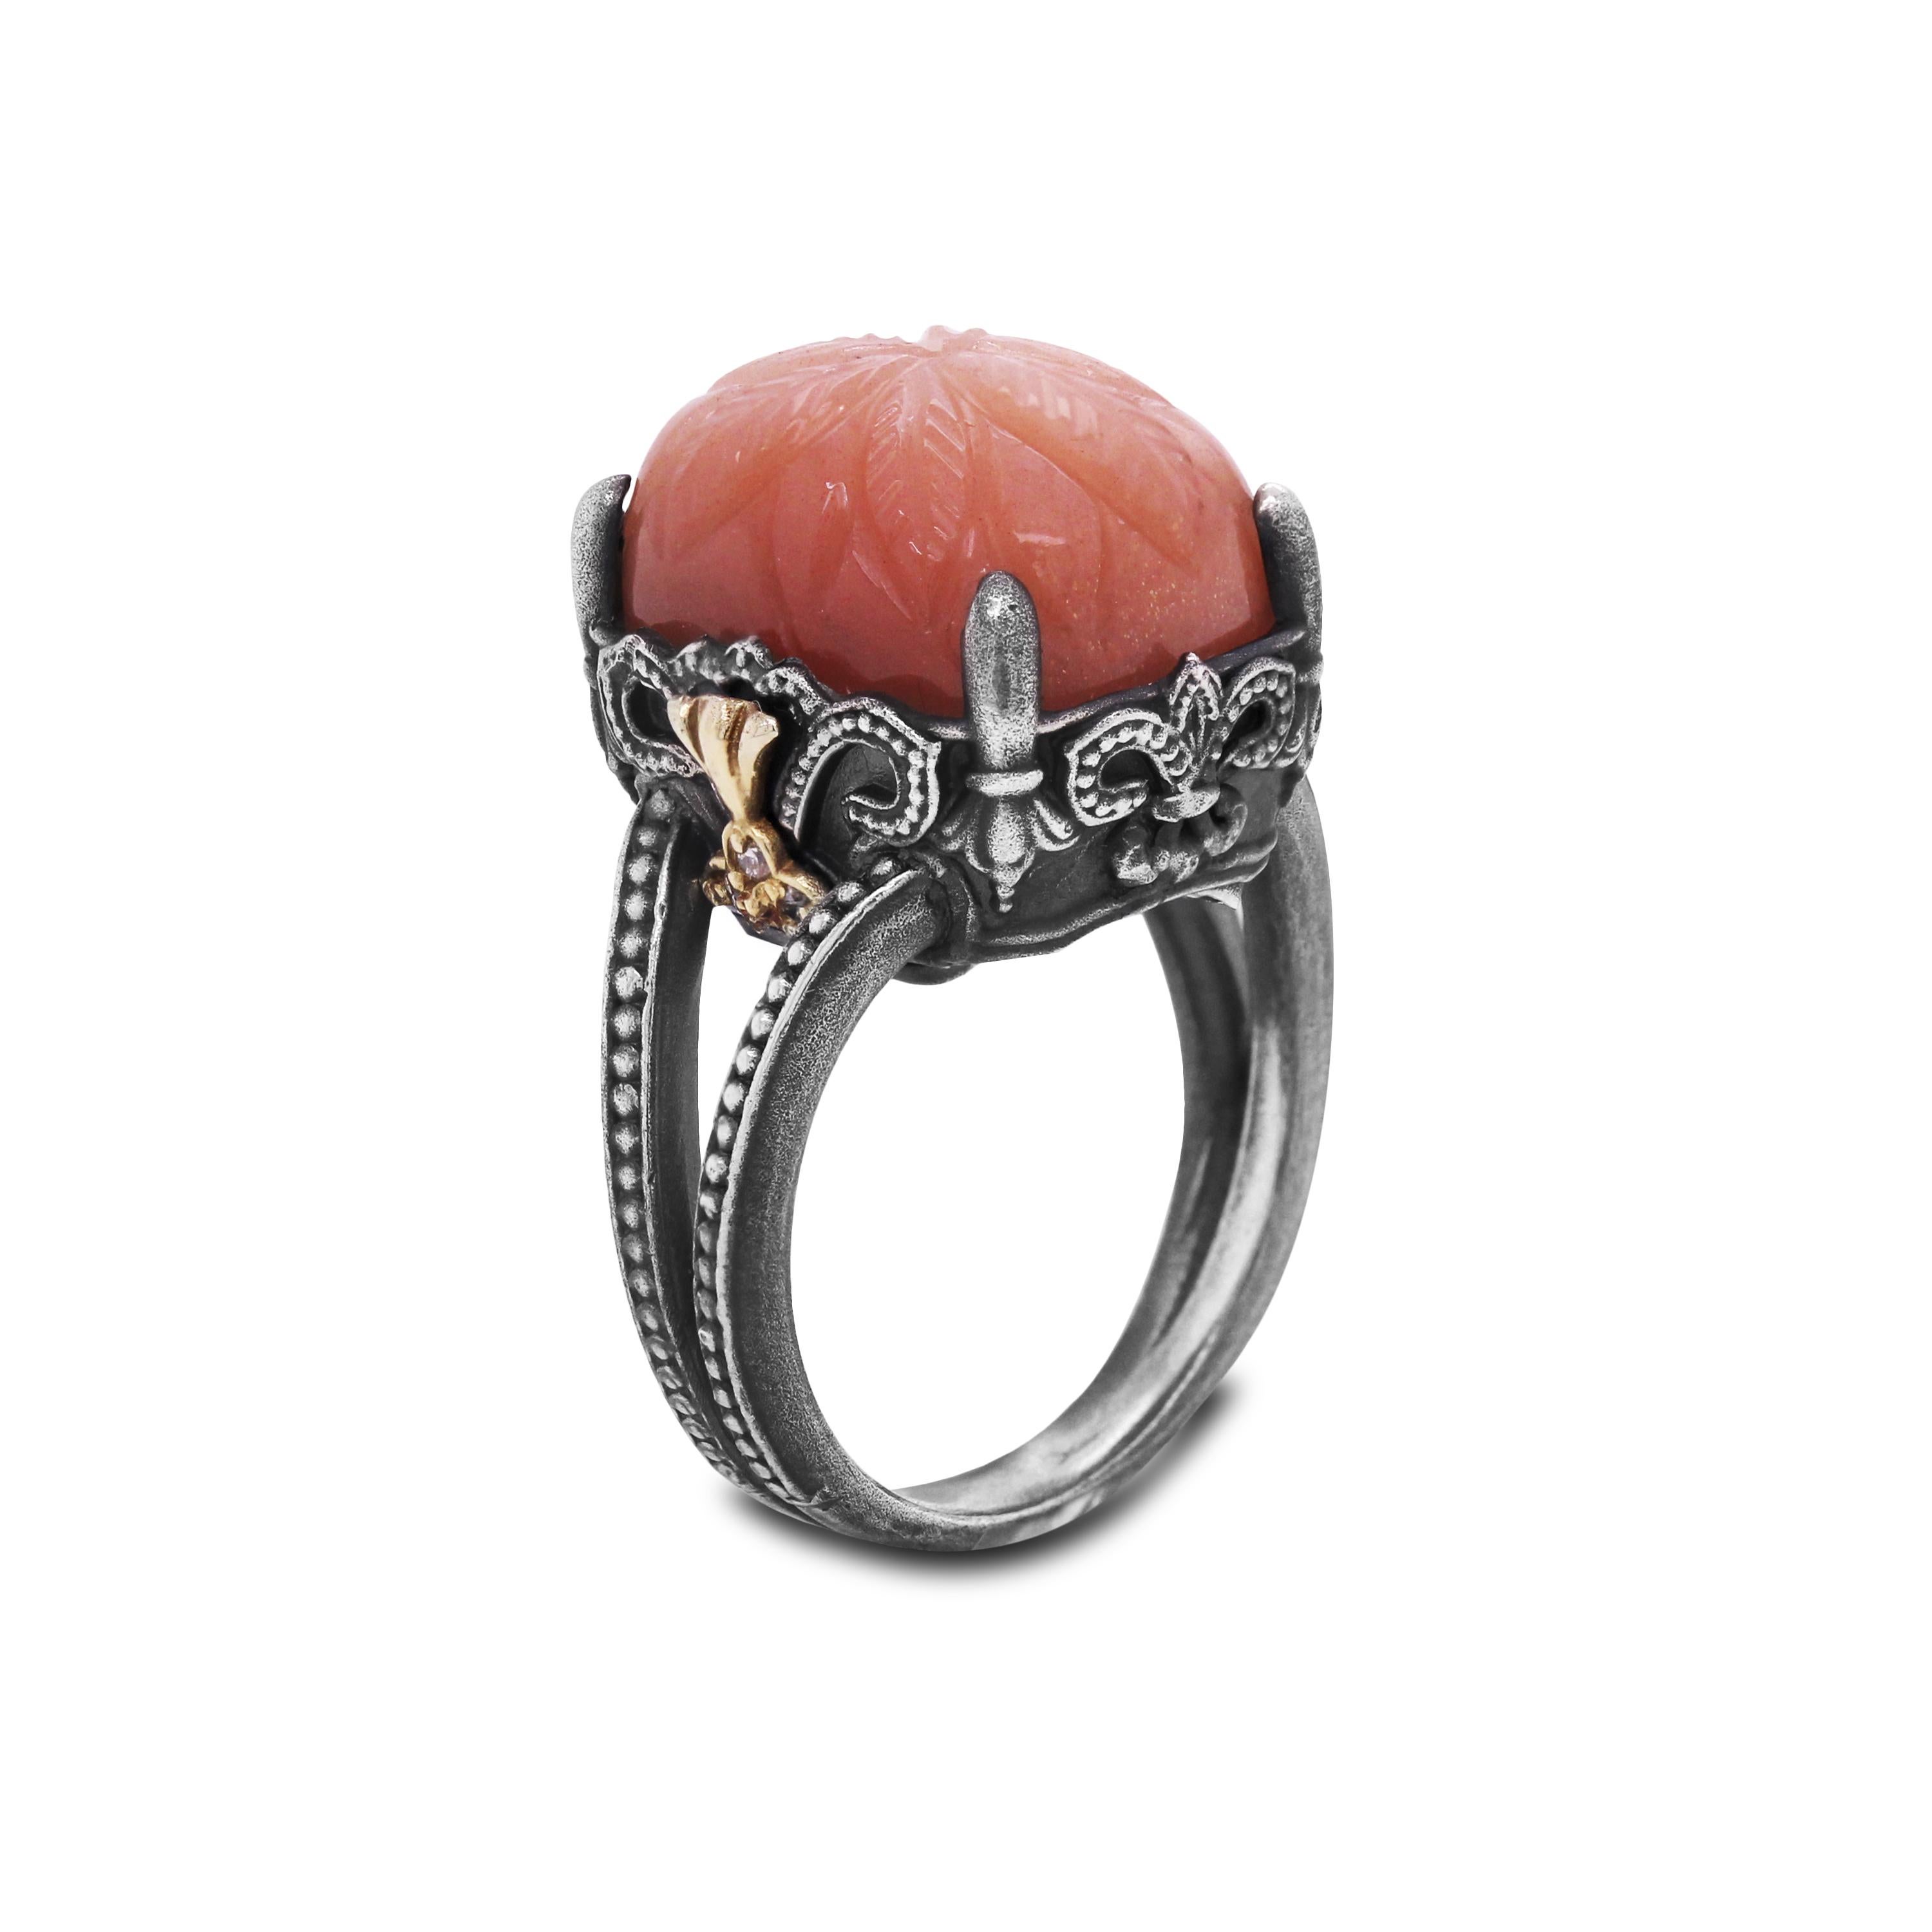 Women's Silver and Gold Ring with Diamonds and Floral Carved Peach Moonstone Stambolian